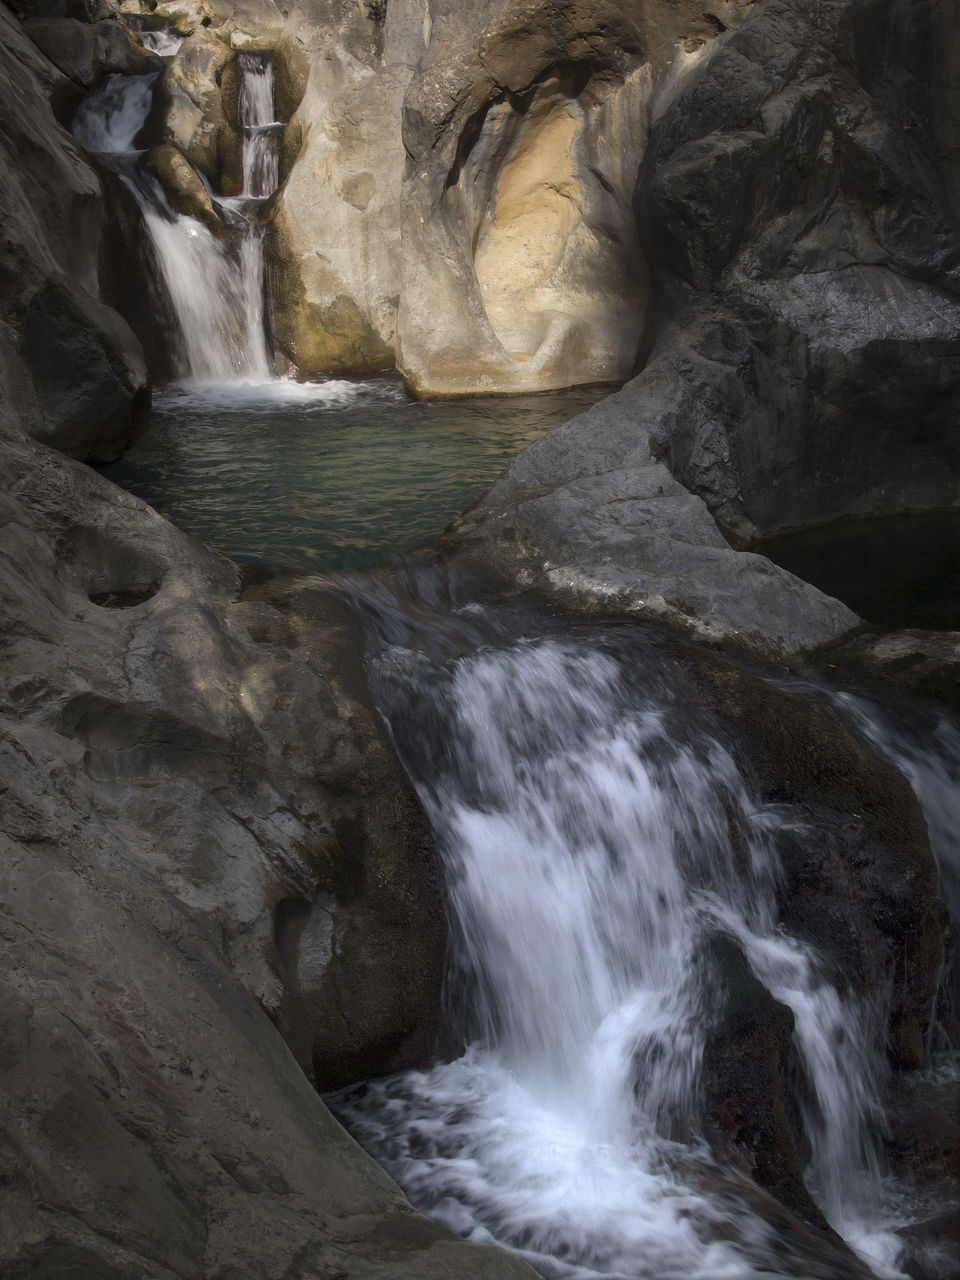 SCENIC VIEW OF WATERFALL IN ROCKS